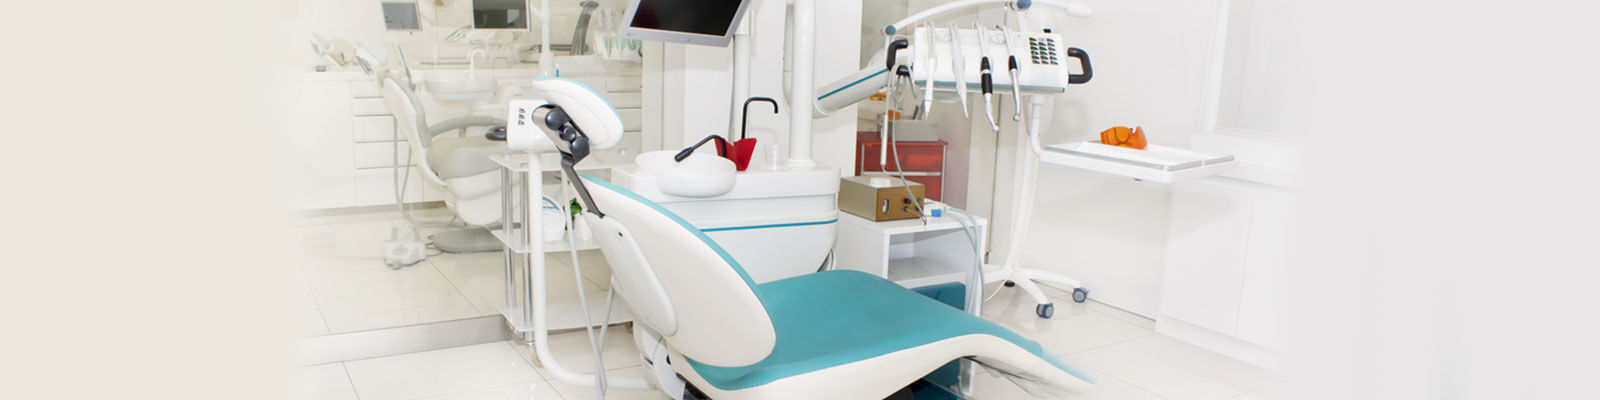 Dr Ghosh's Dental And Eye Care